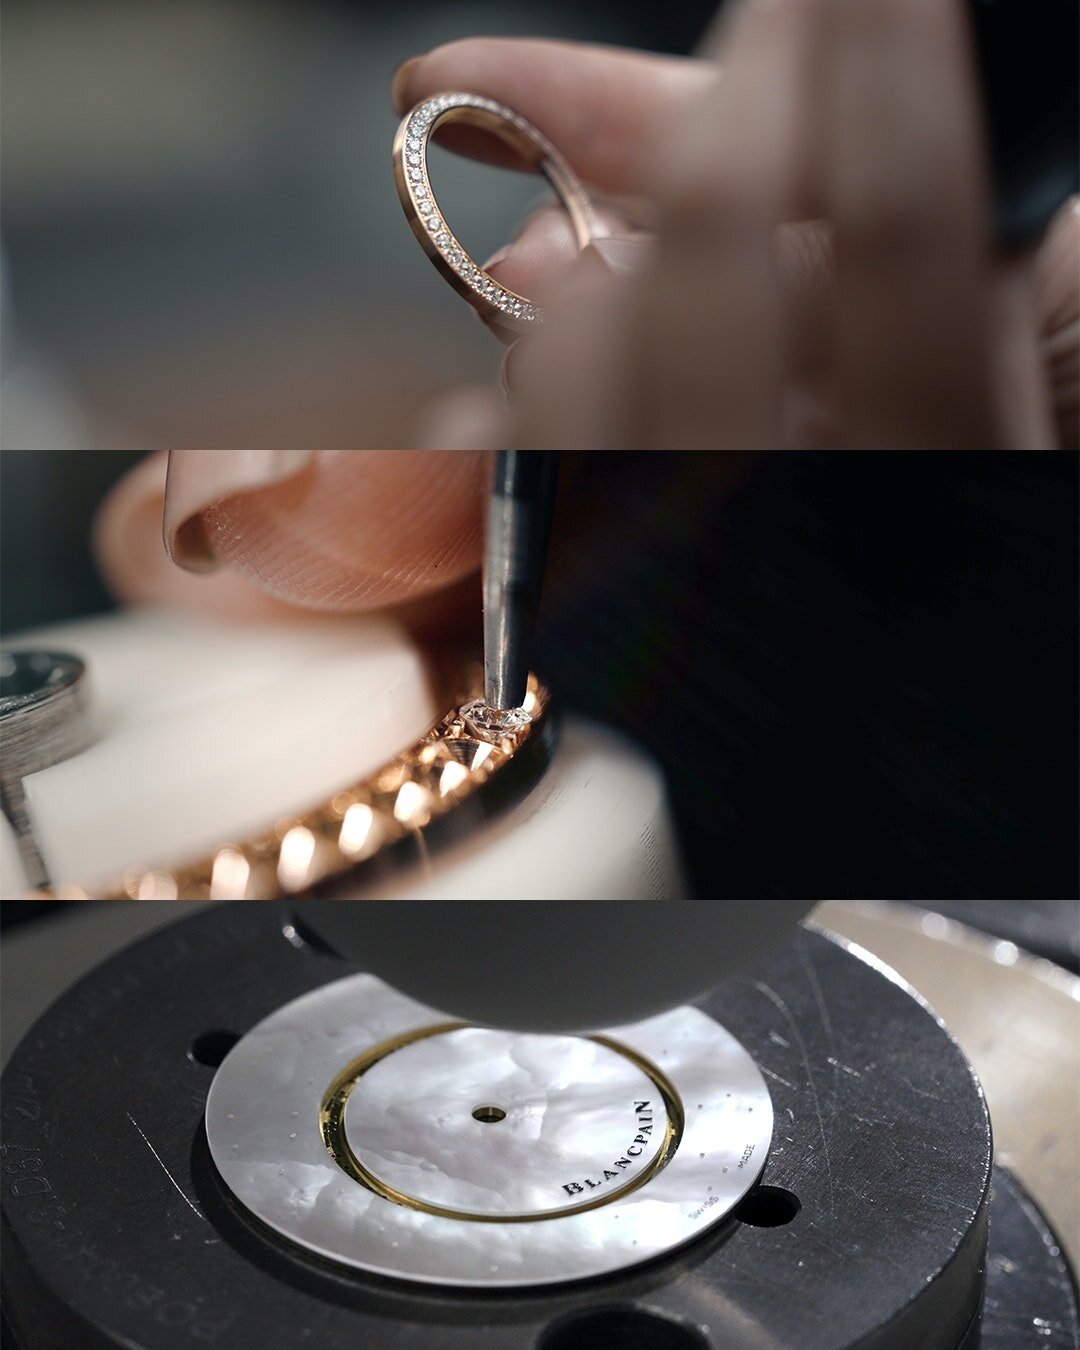 Blancpain is a renowned Swiss luxury watch manufacturer with a rich history and a reputation for producing some of the finest timepieces in the world. 

We collaborate with this unique brand on a regular basis to create visually stunning and immersiv